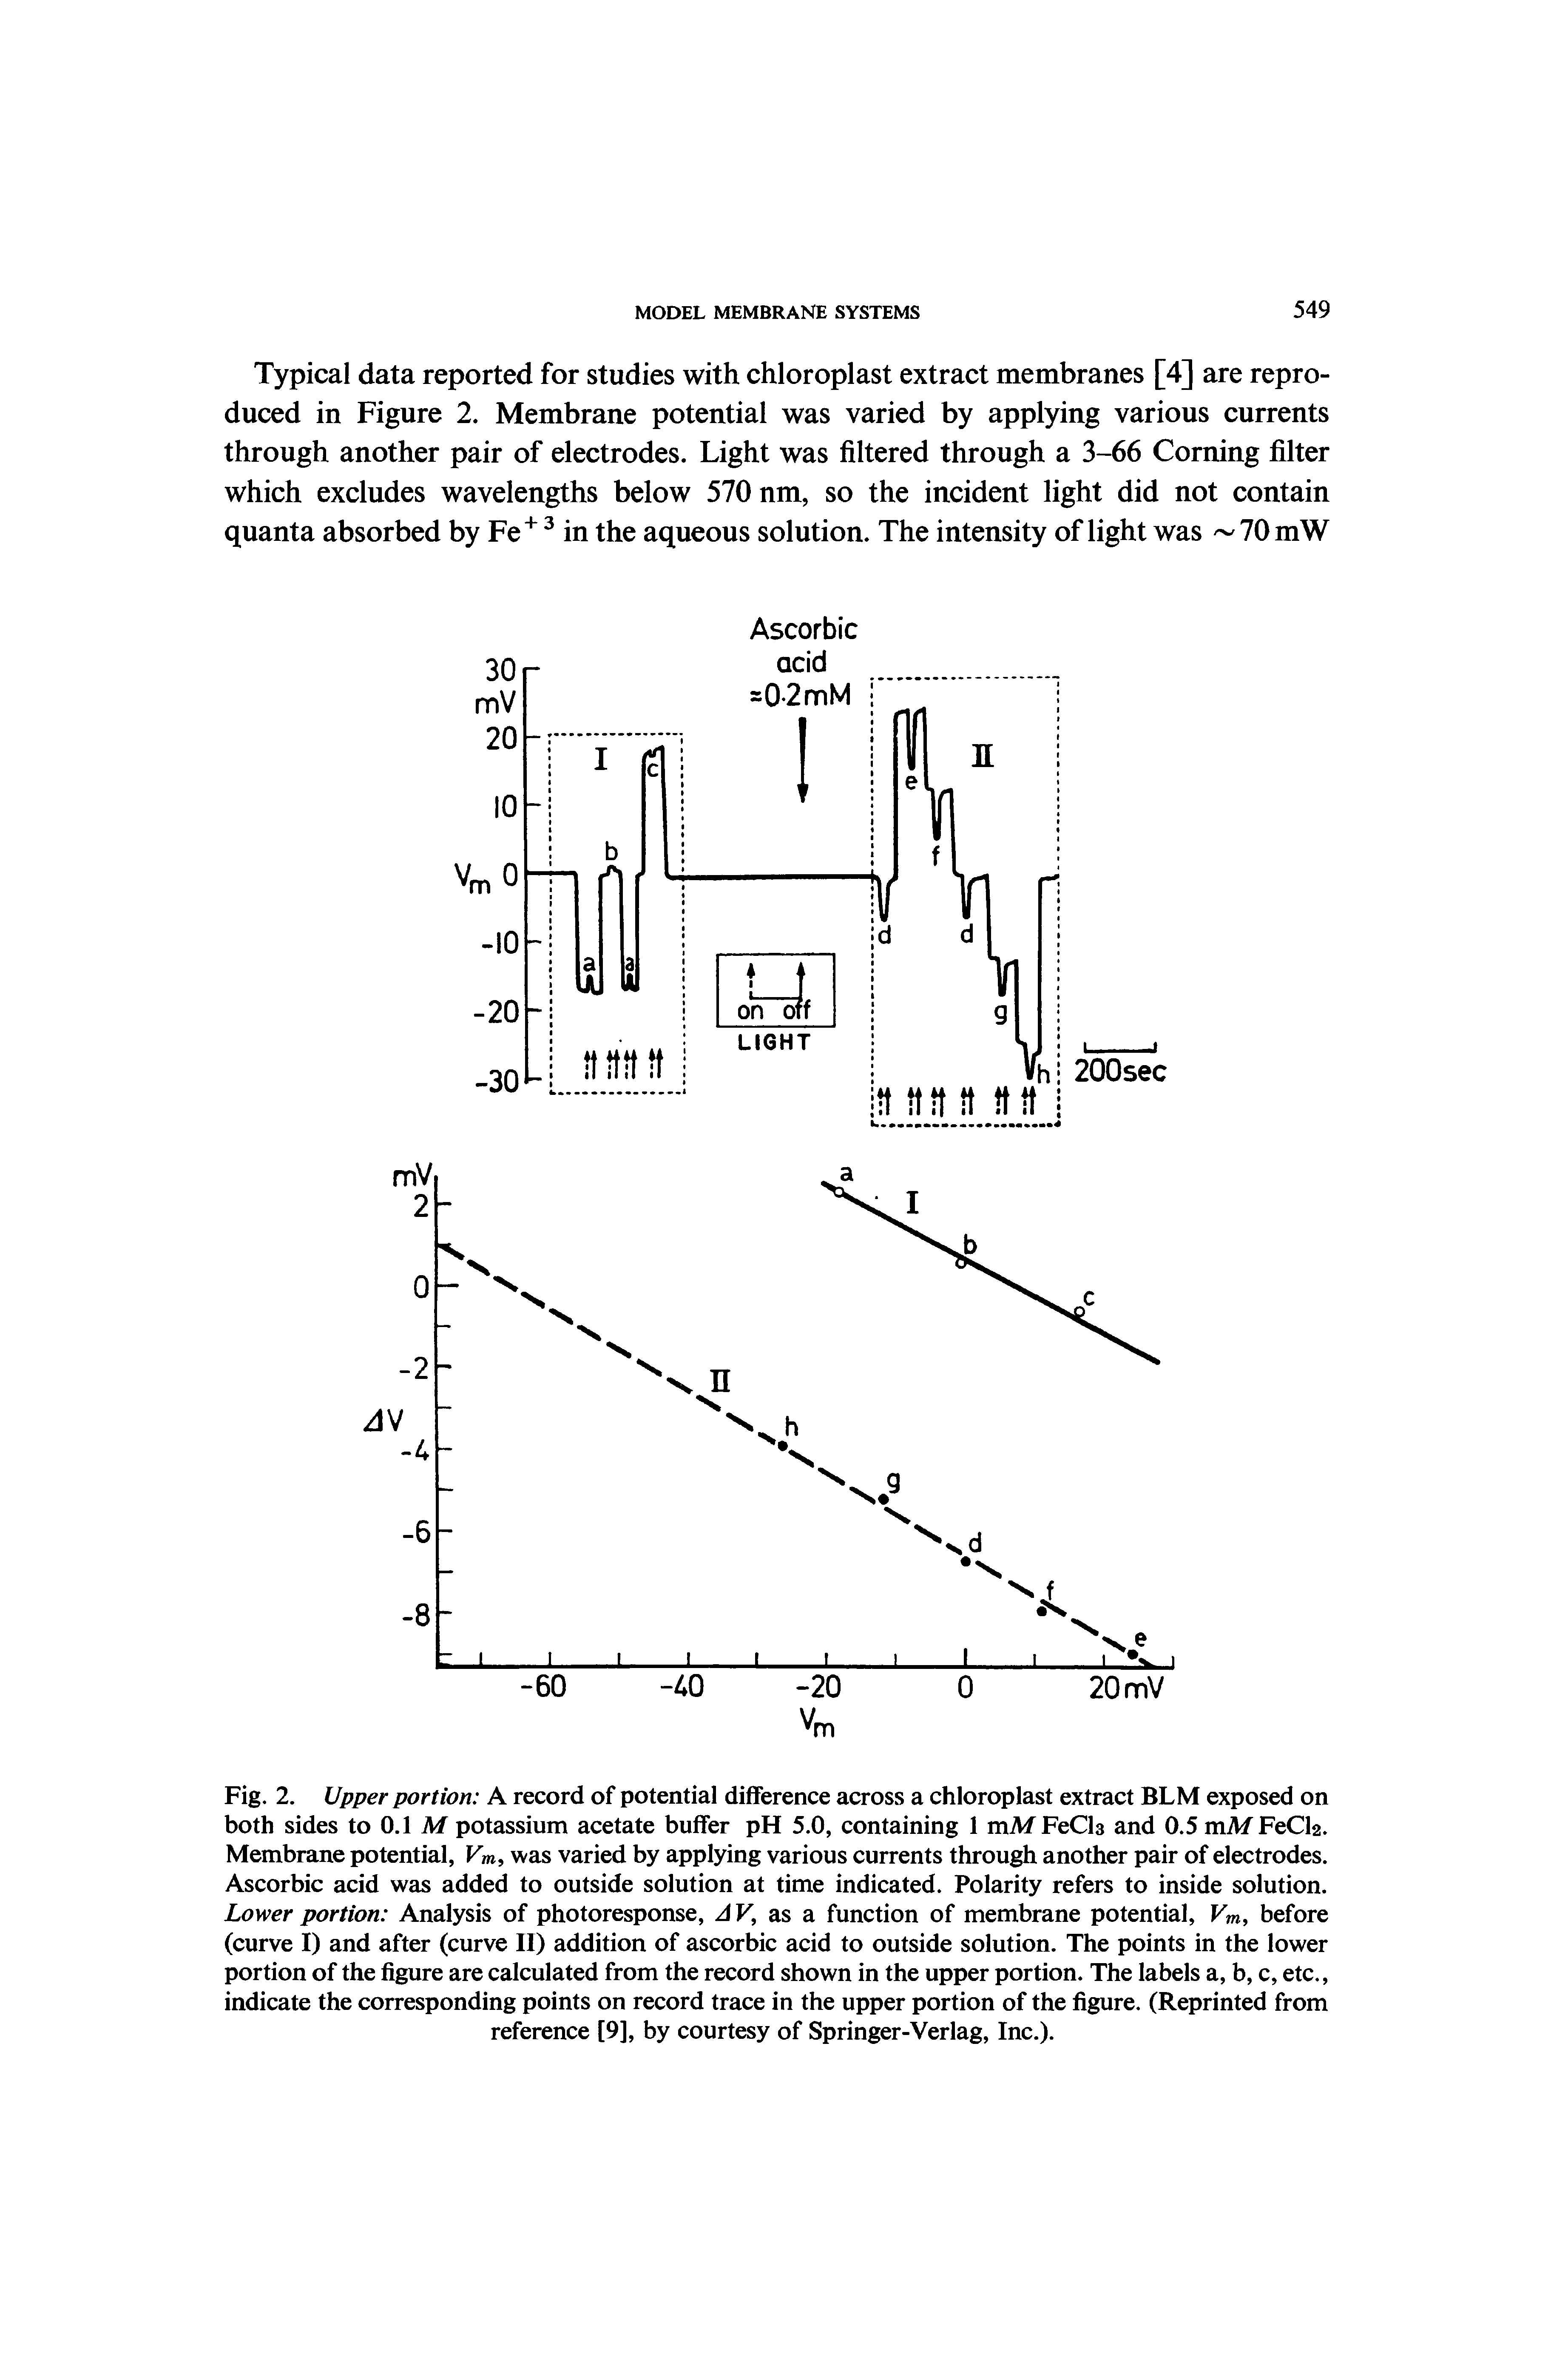 Fig. 2. Upper portion A record of potential difference across a chloroplast extract BLM exposed on both sides to 0.1 M potassium acetate buffer pH 5.0, containing 1 mMFeCls and 0.5 mM FeCla. Membrane potential, was varied by applying various currents through another pair of electrodes. Ascorbic acid was added to outside solution at time indicated. Polarity refers to inside solution. Lower portion Analysis of photoresponse, JK, as a function of membrane potential, Vm, before (curve I) and after (curve II) addition of ascorbic acid to outside solution. The points in the lower portion of the figure are calculated from the record shown in the upper portion. The labels a, b, c, etc., indicate the corresponding points on record trace in the upper portion of the figure. (Reprinted from reference [9], by courtesy of Springer-Verlag, Inc.).